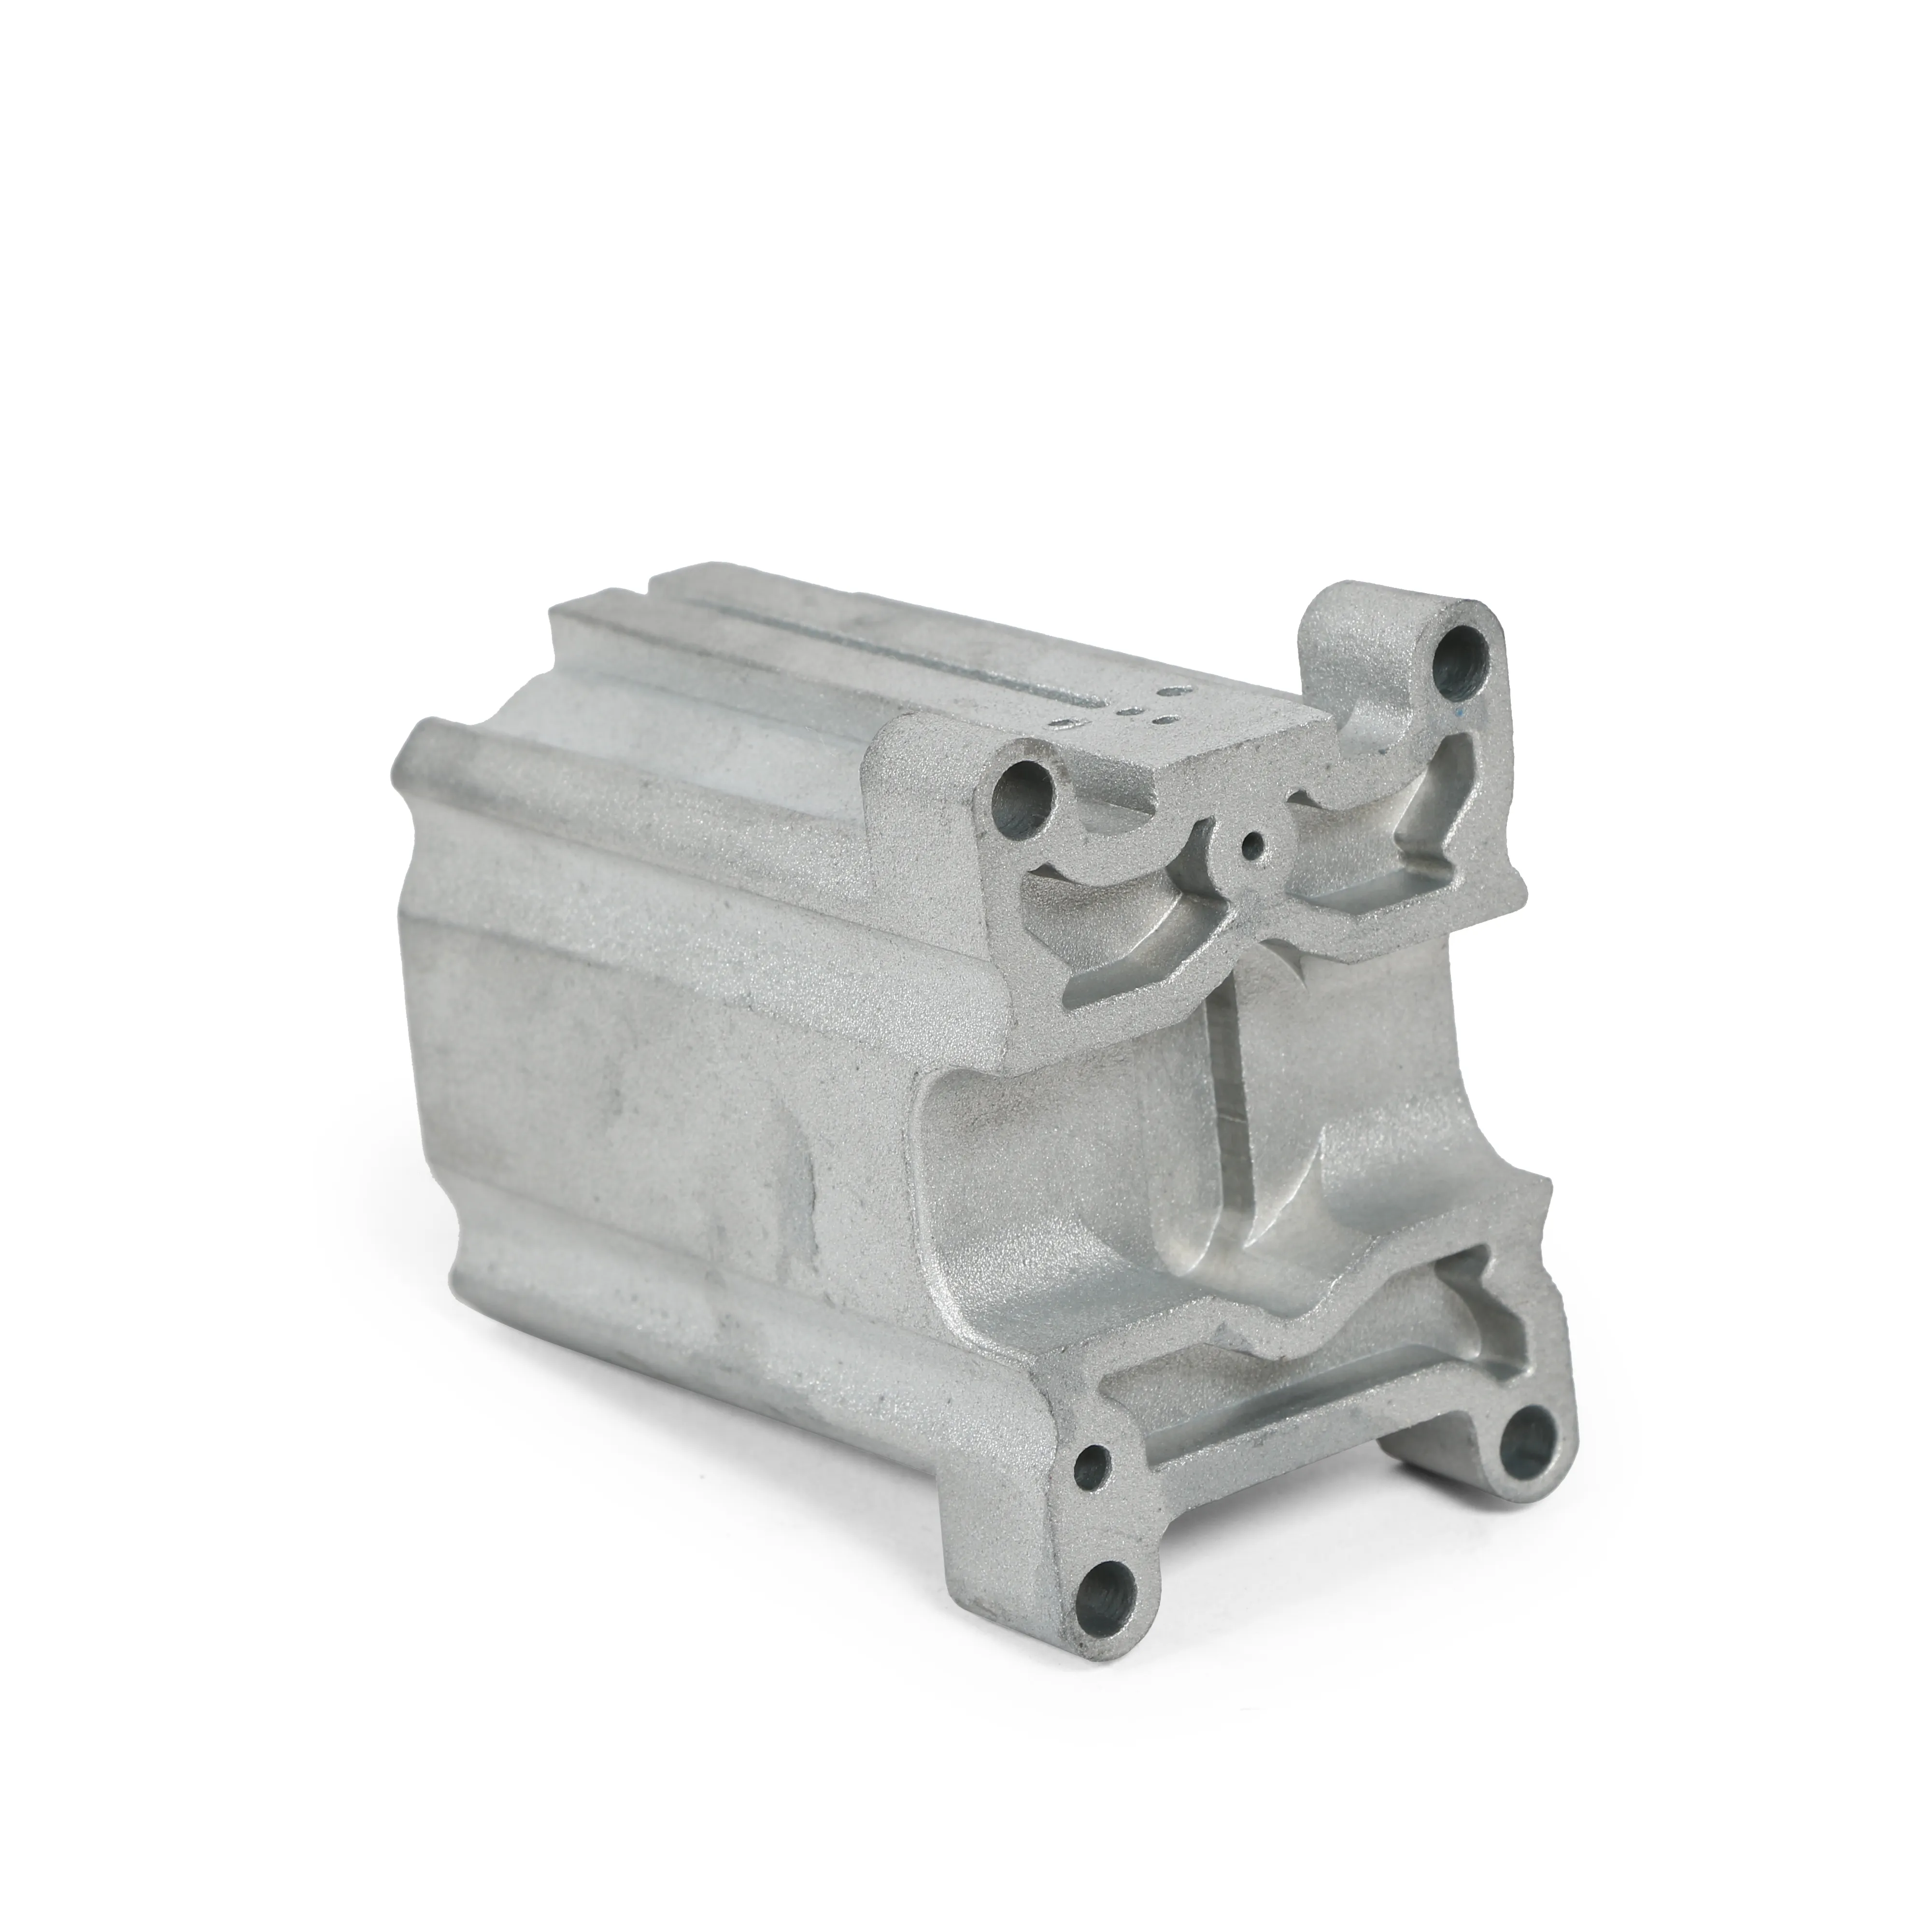 Hot selling high quality durable electric vehicles with high precision zmack 5 zinc die casting